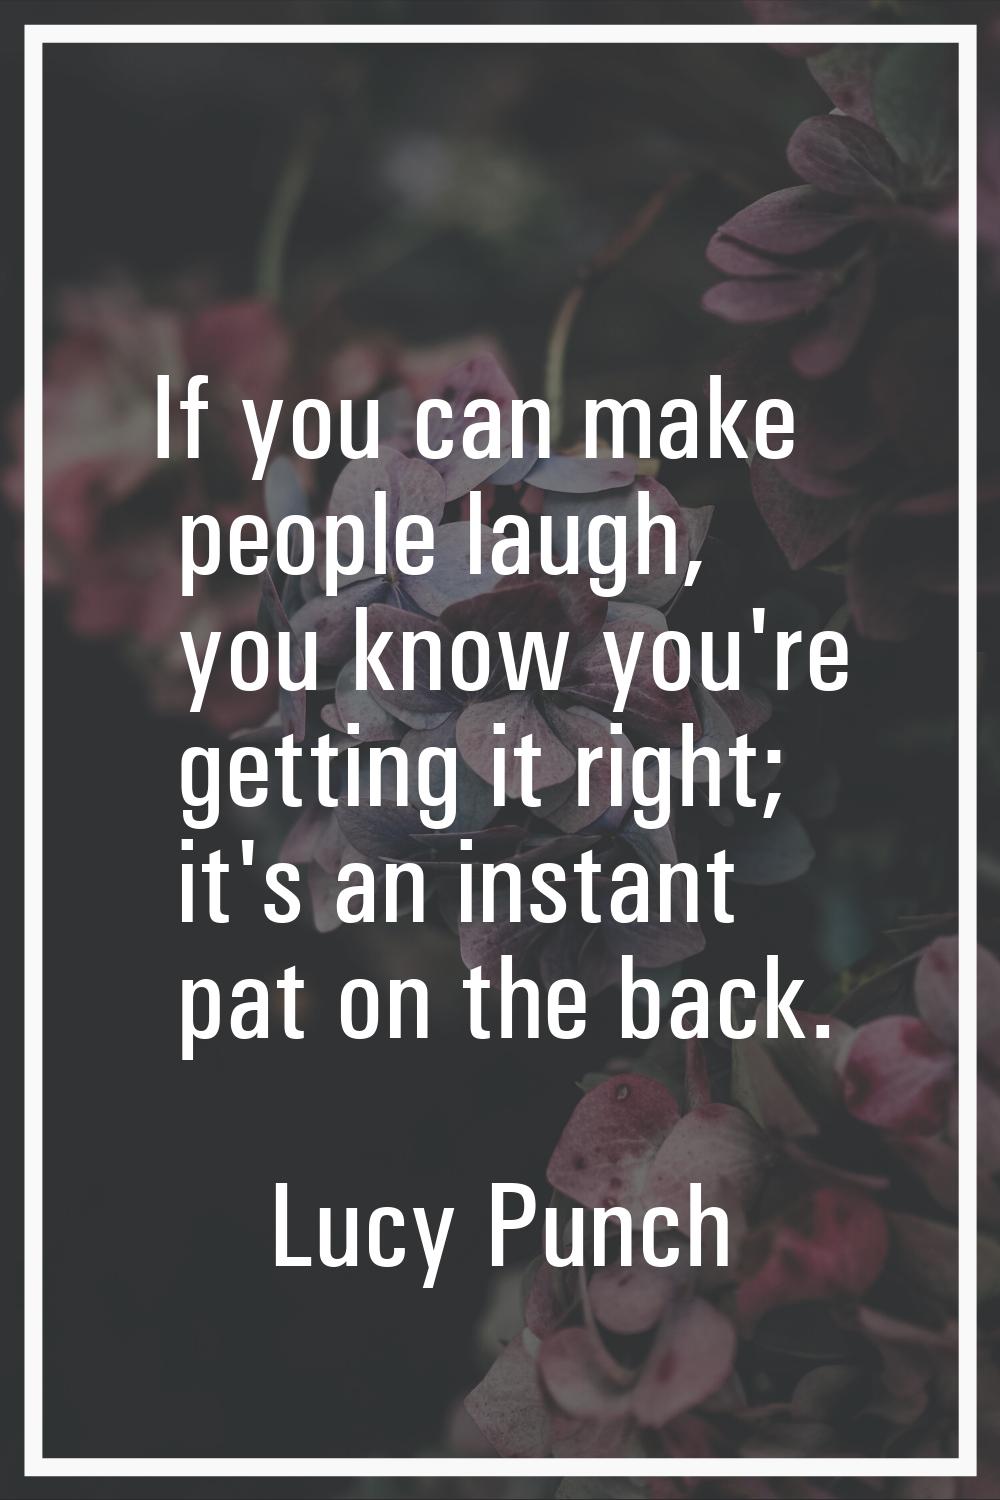 If you can make people laugh, you know you're getting it right; it's an instant pat on the back.